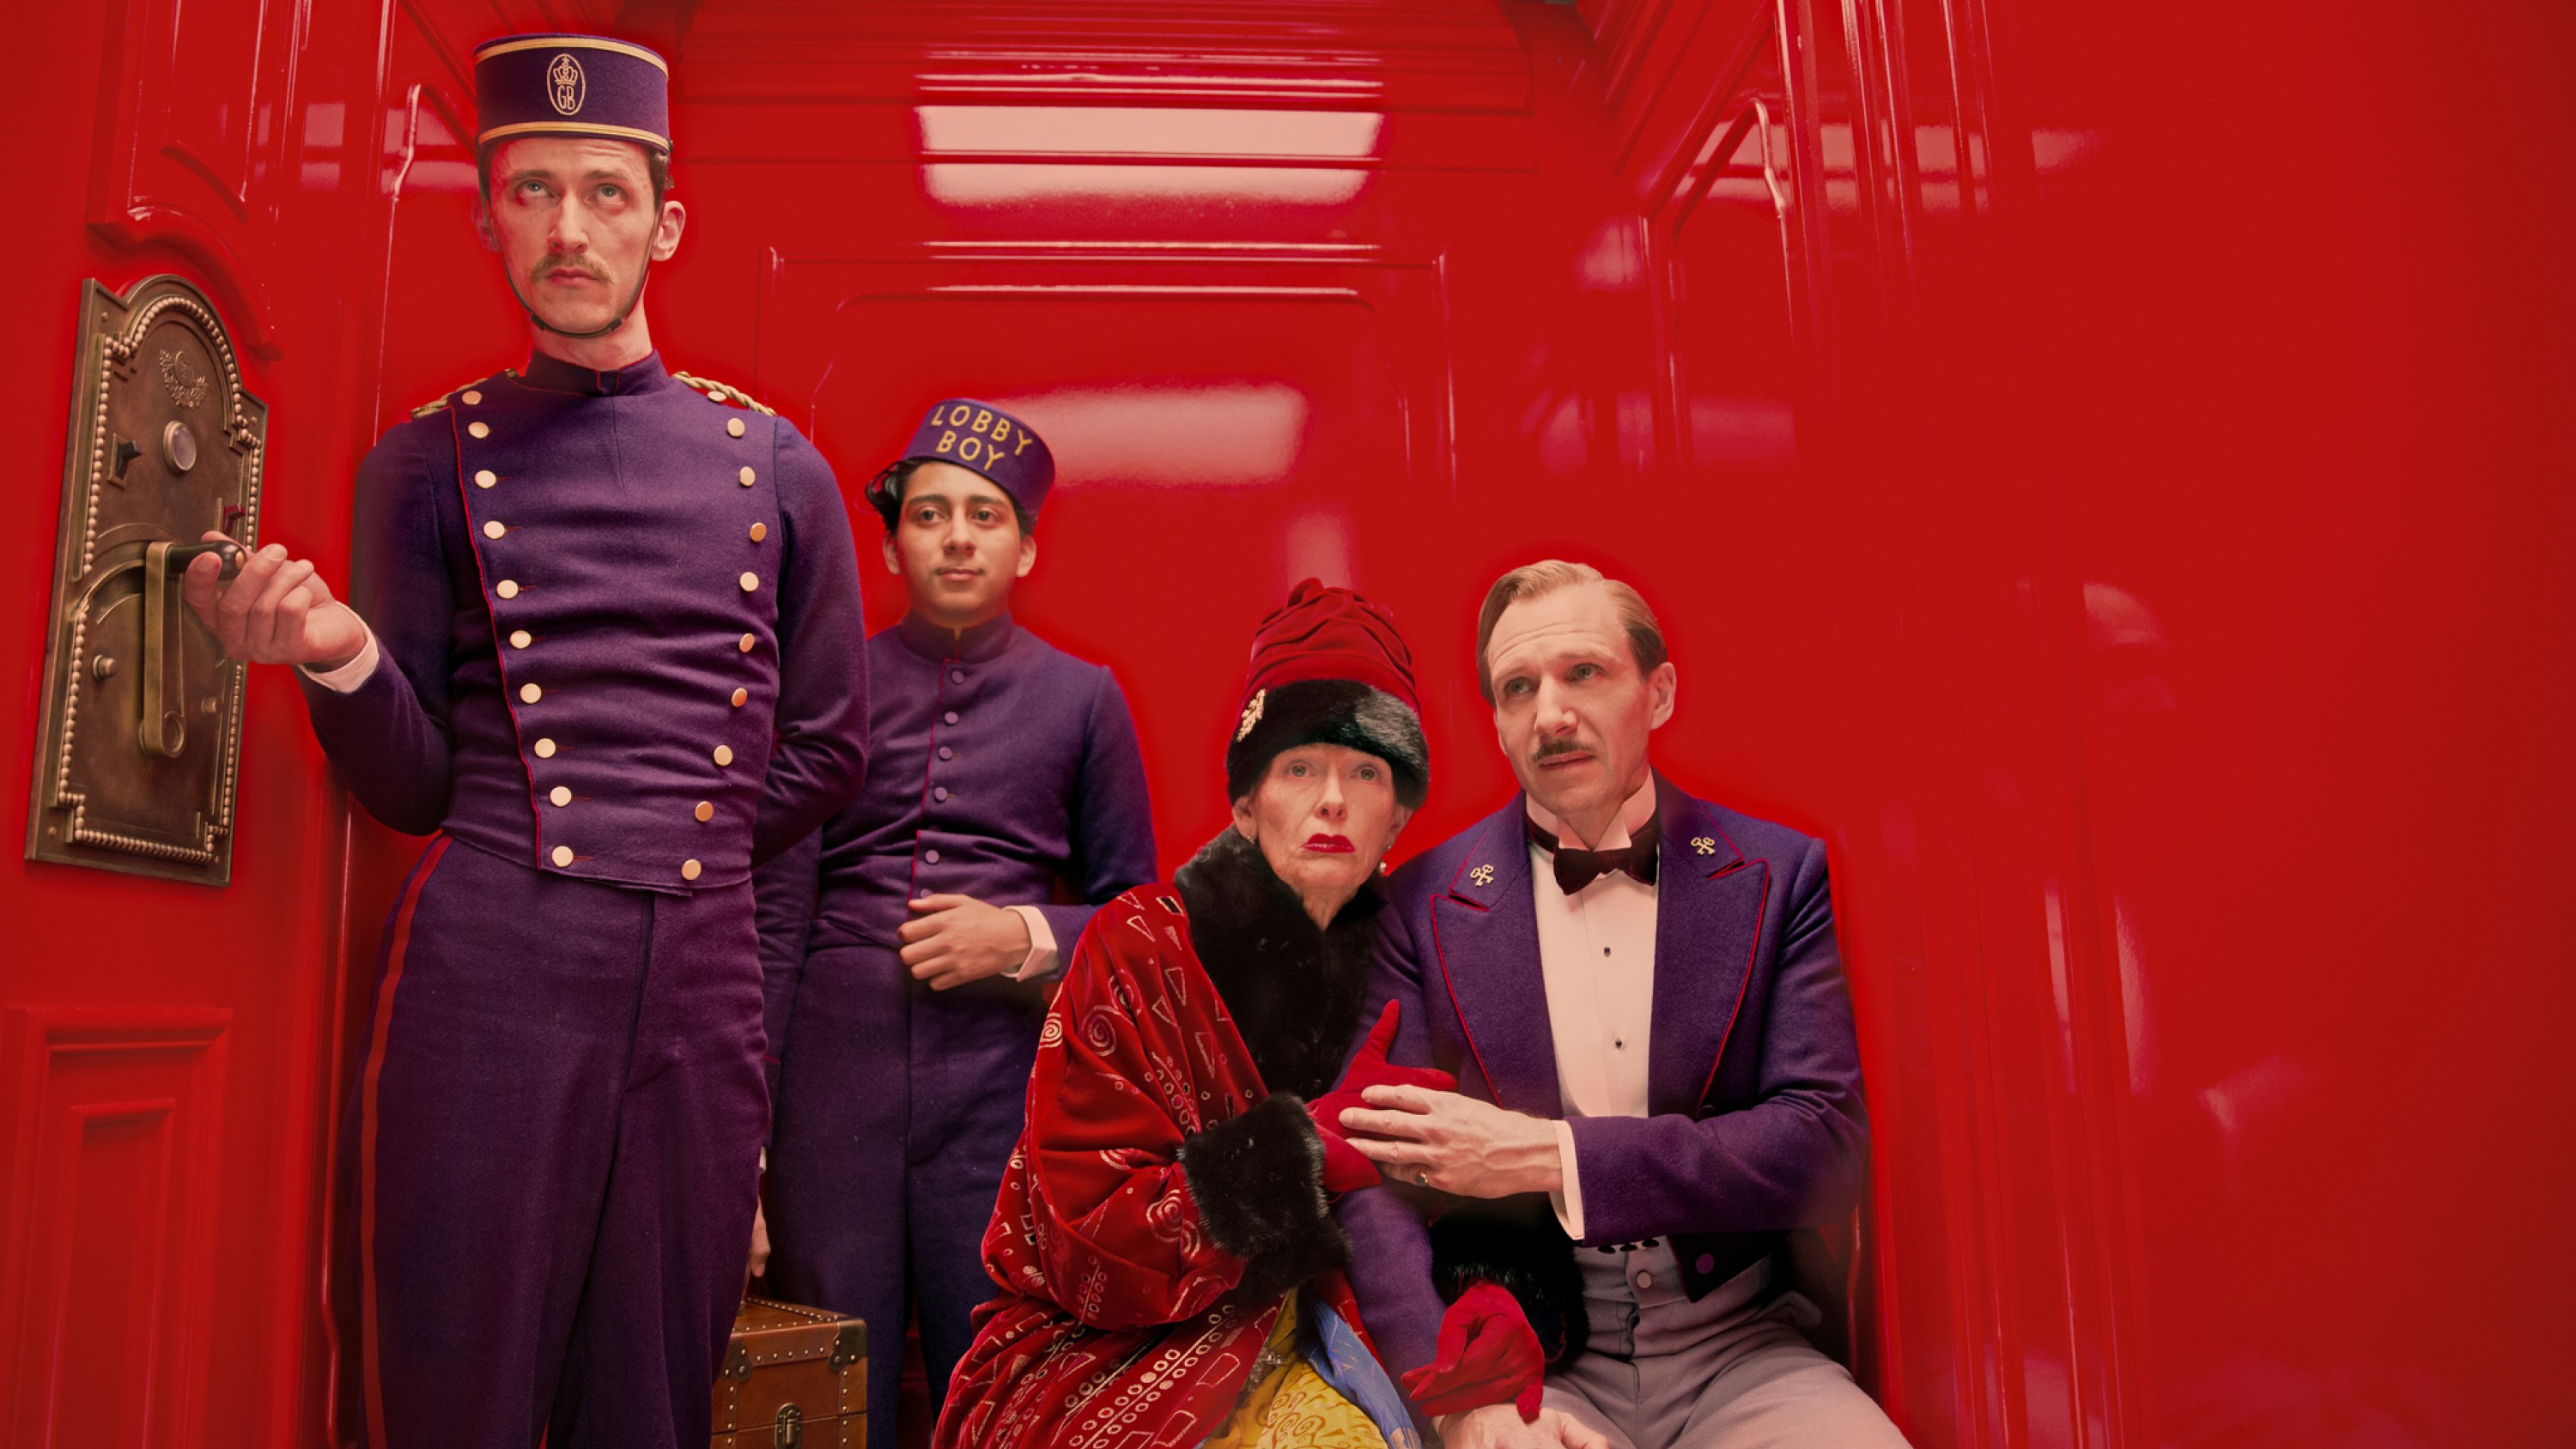 A film guide on The Grand Budapest Hotel (2014). thumbnail